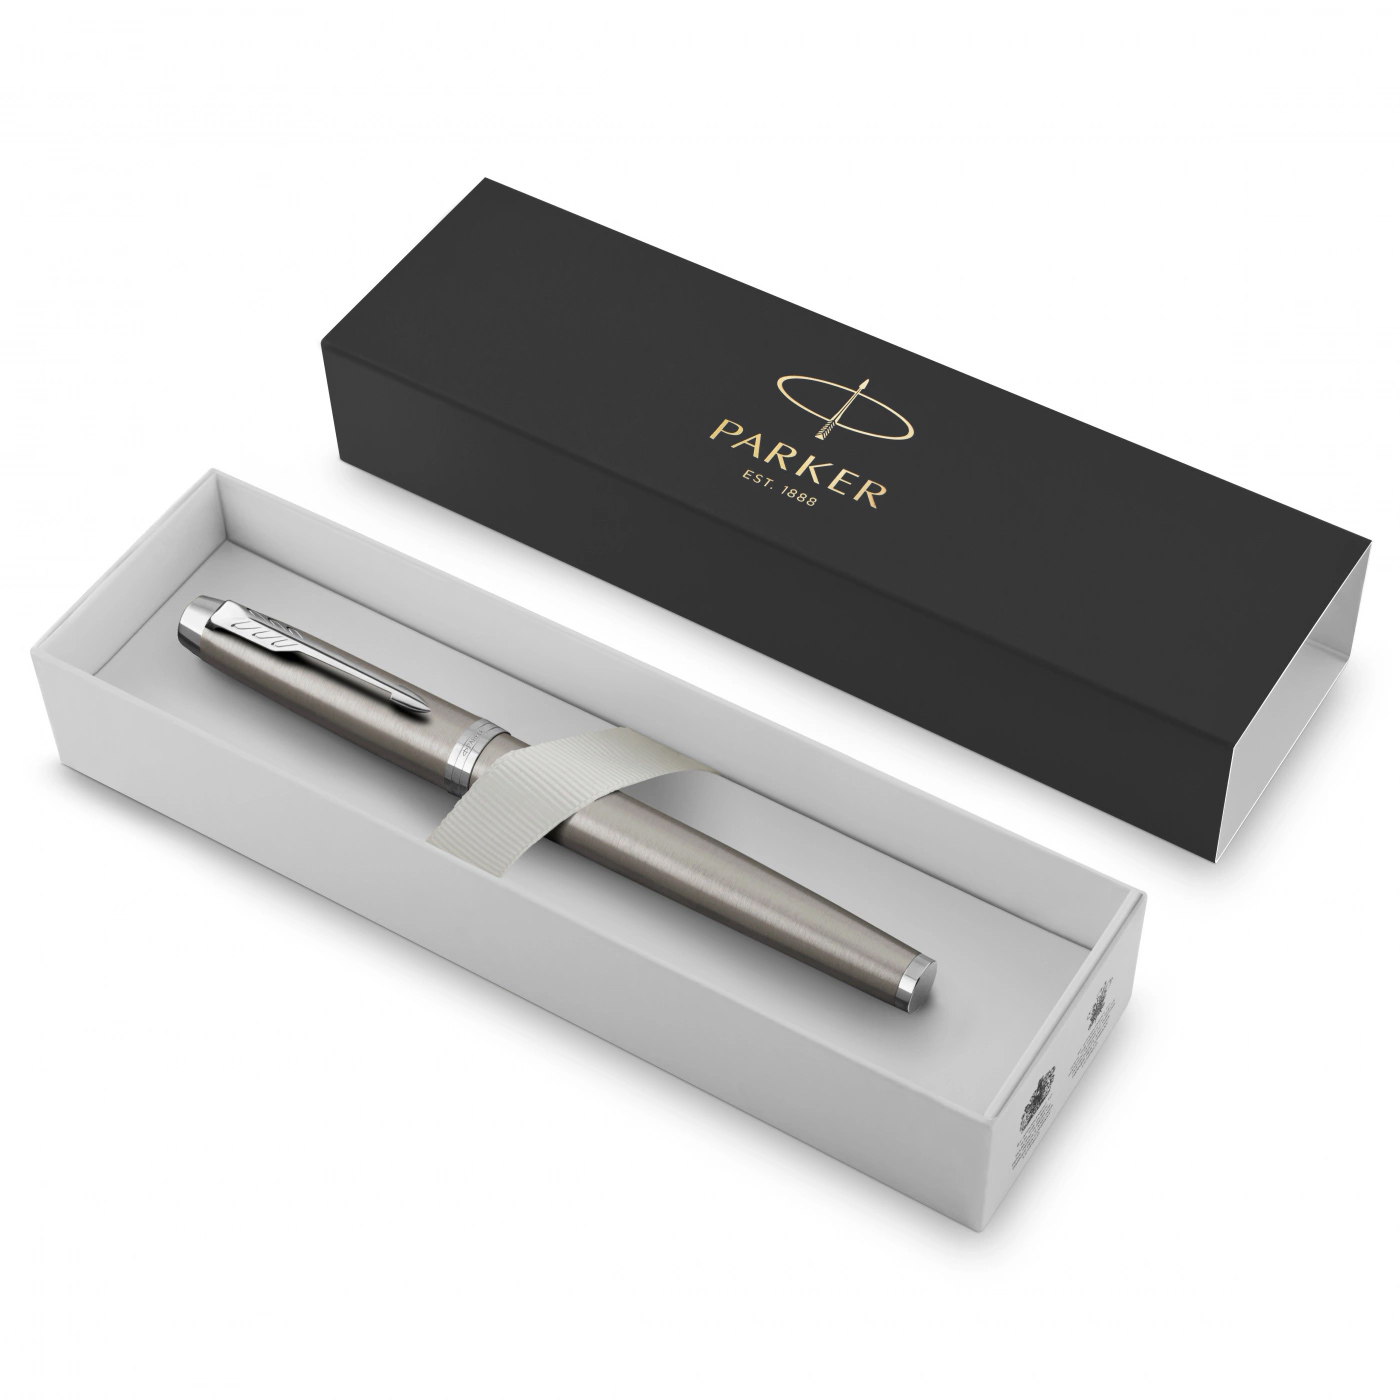 IM Stainless Steel Fountain Pen in the group Pens / Fine Writing / Fountain Pens at Pen Store (125380)